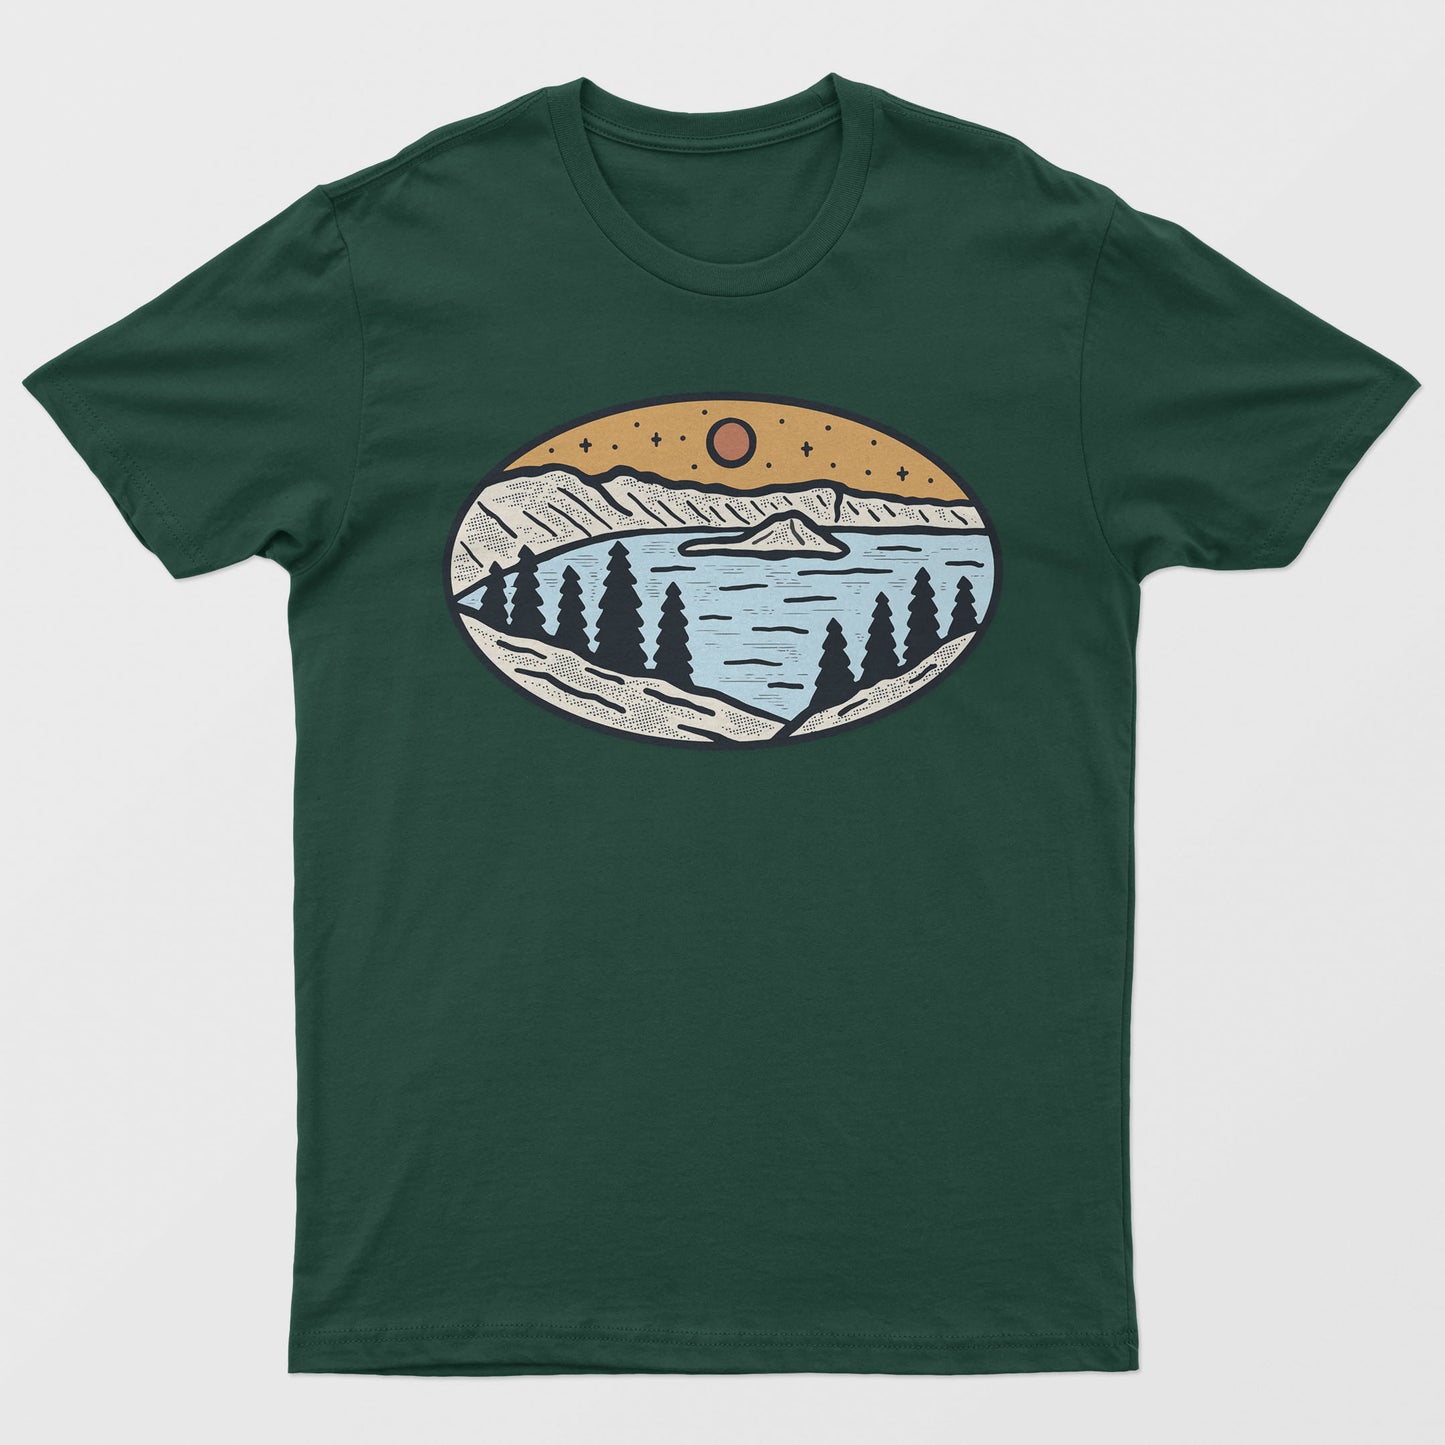 Vintage Crater Lake Oregon Tee - S-XXXL, Assorted Colors, Free Shipping